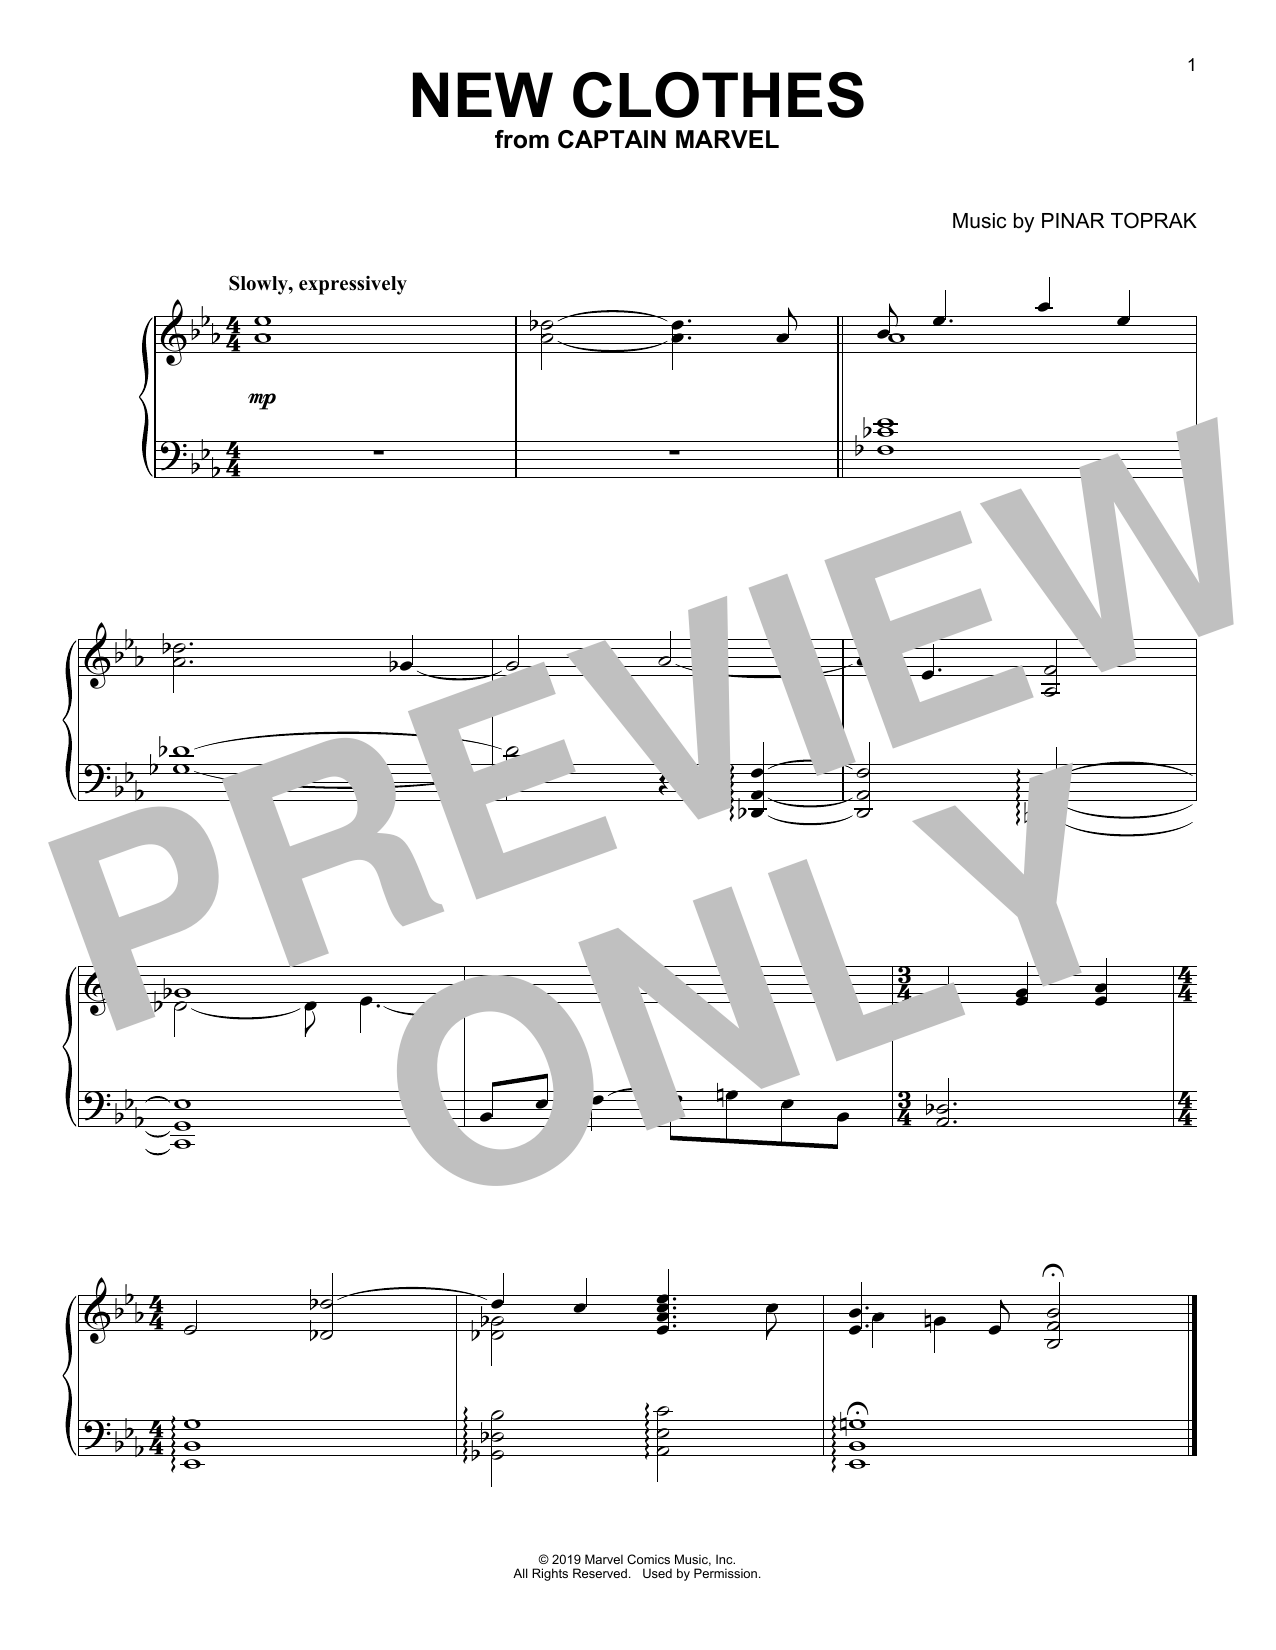 Download Pinar Toprak New Clothes (from Captain Marvel) Sheet Music